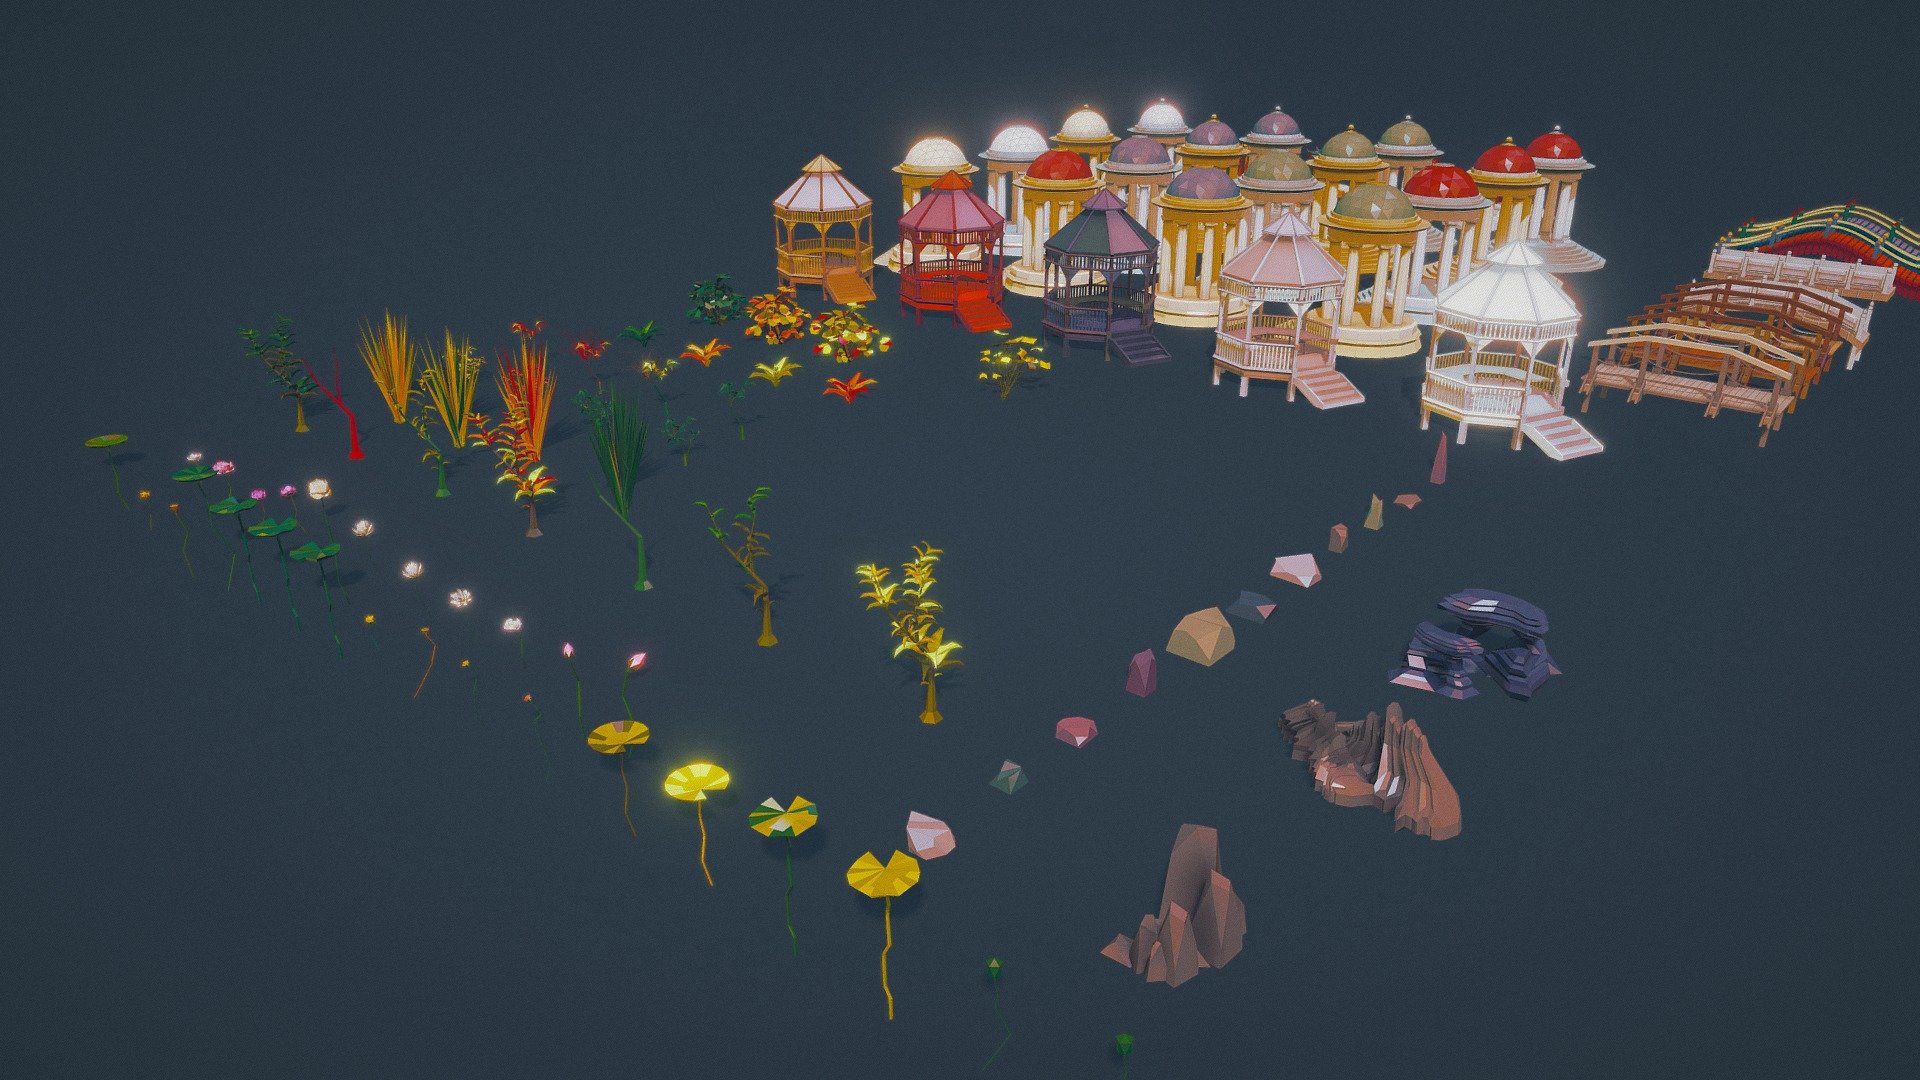 YouTube - DemoScene

This set includes game ready models of flowers, bushes, rocks, bridges, arbours, rotundas and water flowers. 



Formats:max(3ds Max 2016), blend (Blender 2.81), fbx, obj, stl, 3ds.
*

Full list of all 50 models:



Arbours:

Chinese arbour-1 

Chinese arbour-2 

Rotunda-1

Rotunda-2 

Arbour 



Water plants:

Lotus fp-1

Lotus fp-2

Lotus fp-3

Lotus fw-1

Lotus fw-2

Lotus fw-3

Lotus leaf

Lotus bud p-1

Lotus bud p-2

Lotus bud g-1

Lotus bud o-1

Lotus bud o-2

Lotus bud o-3

Water lily-1

Water lily-2

Water lily leaf



Bushes and plants:

Aloe

Bush-1

Bush-2

Bush-2 

Dried bush-1

Dried bush-2

S-bush

A-bush

L-bush

Reed



Briges:
*

AS bridge

S bridge

C bridge 

W bridge 



Stones and rocks:

Rock-1

Rock-2

Rock-3

Stone V-1

Stone V-2

Stone V-3

Stone V-4

Stone A-1

Stone A-2

Stone A-3

Stone F-1

Stone F-2

Stone F-3

Stone F-4

Stone F-5
 - Gazebos and Plants ||| Low Poly Asset - 3D model by Larolei Low Poly (@strix567) 3d model